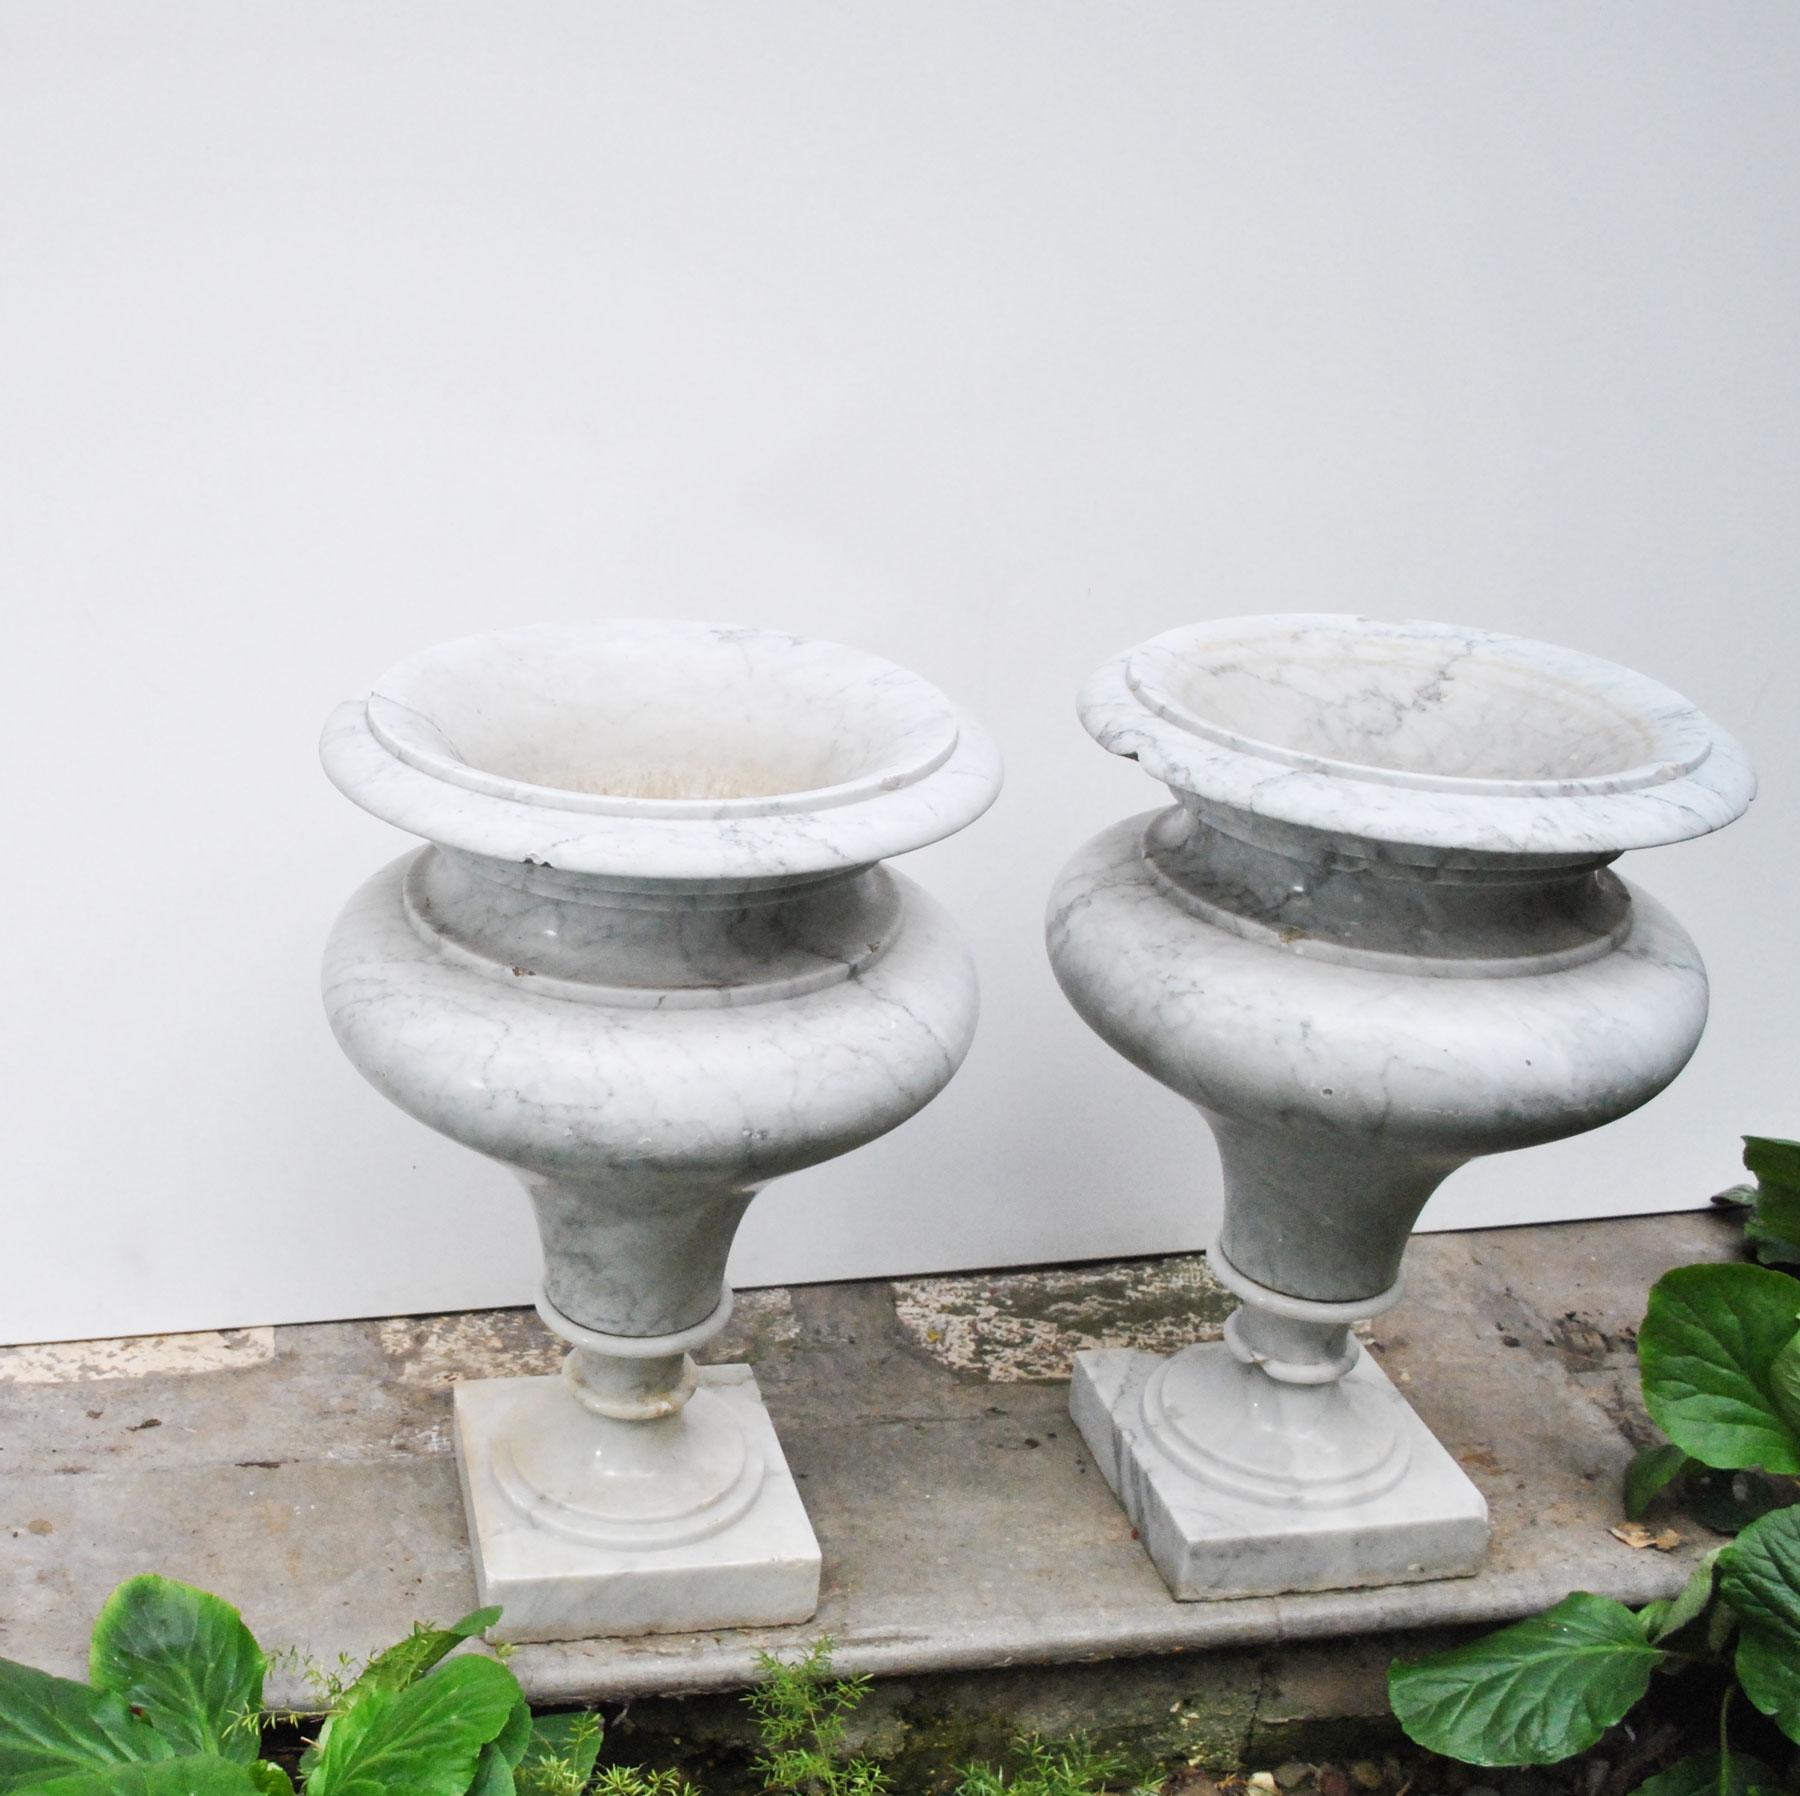 Elegant Pair of Large Carrara Marble Vases, Period Early 20th Century For Sale 3